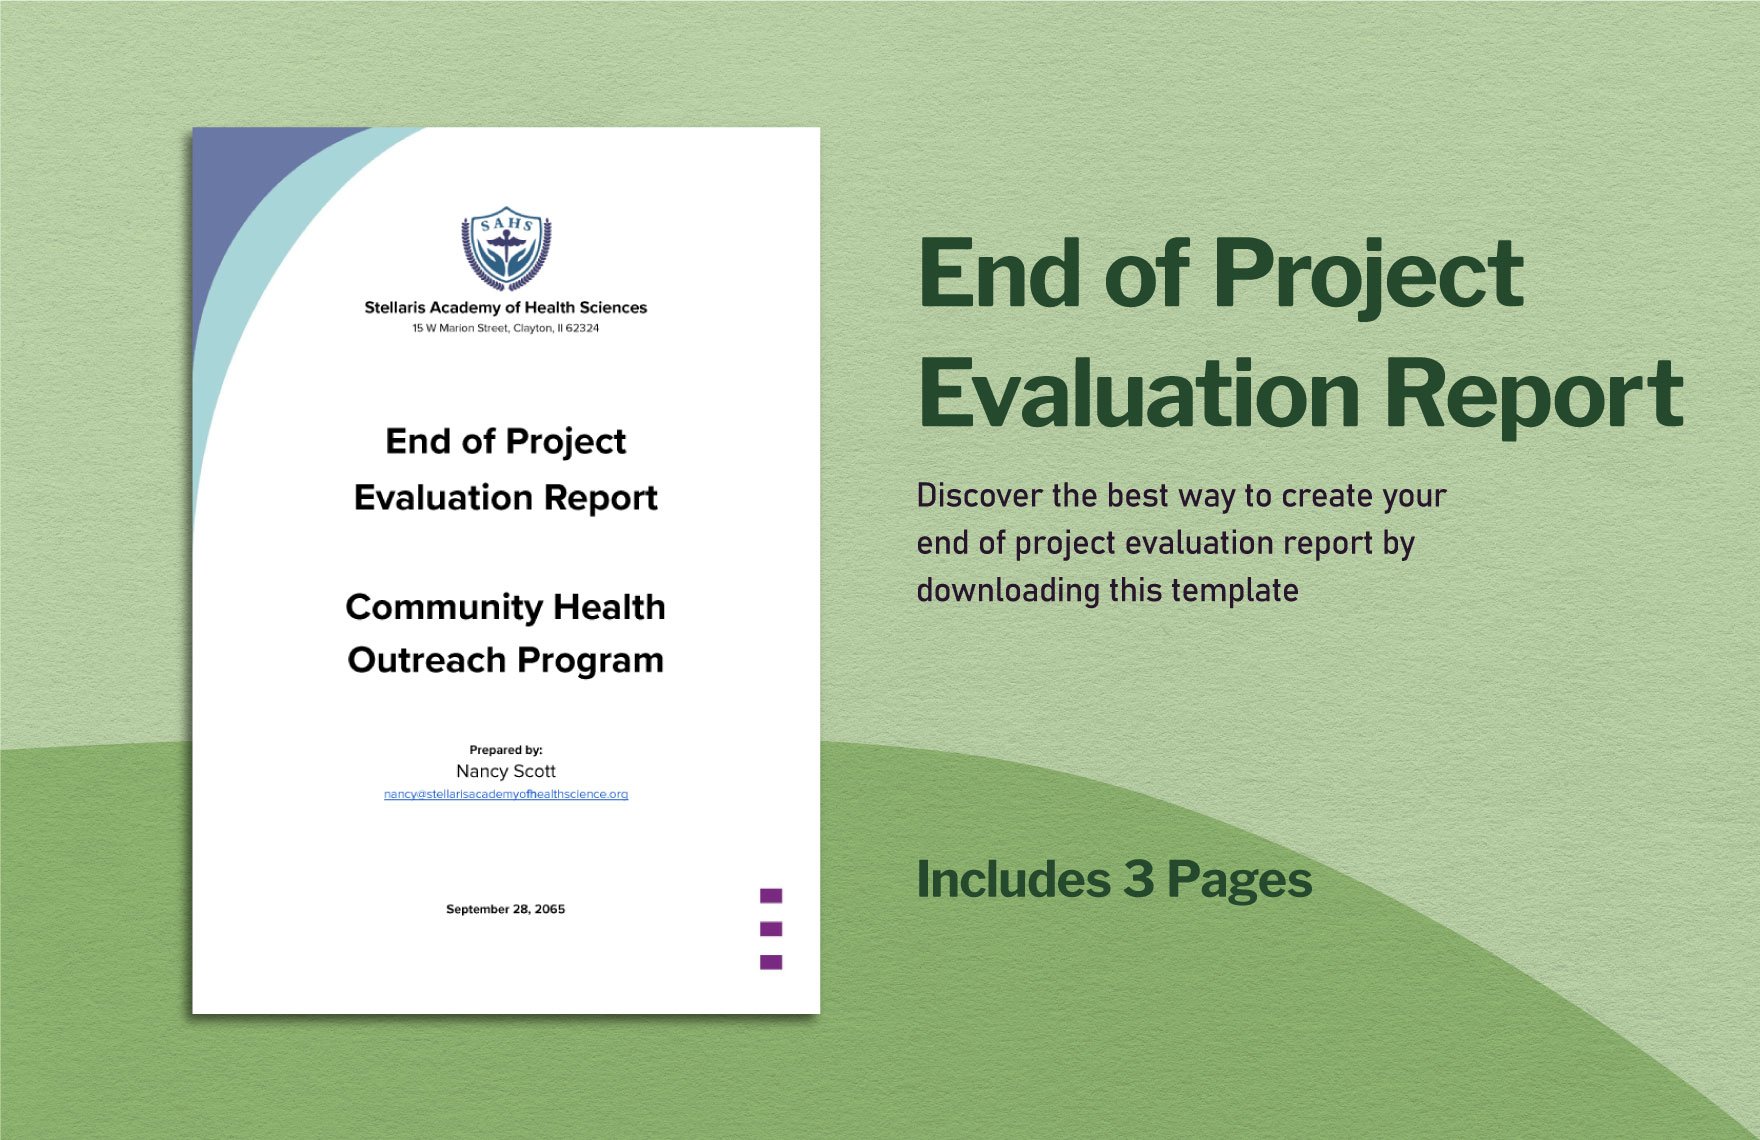 End of Project Evaluation Report